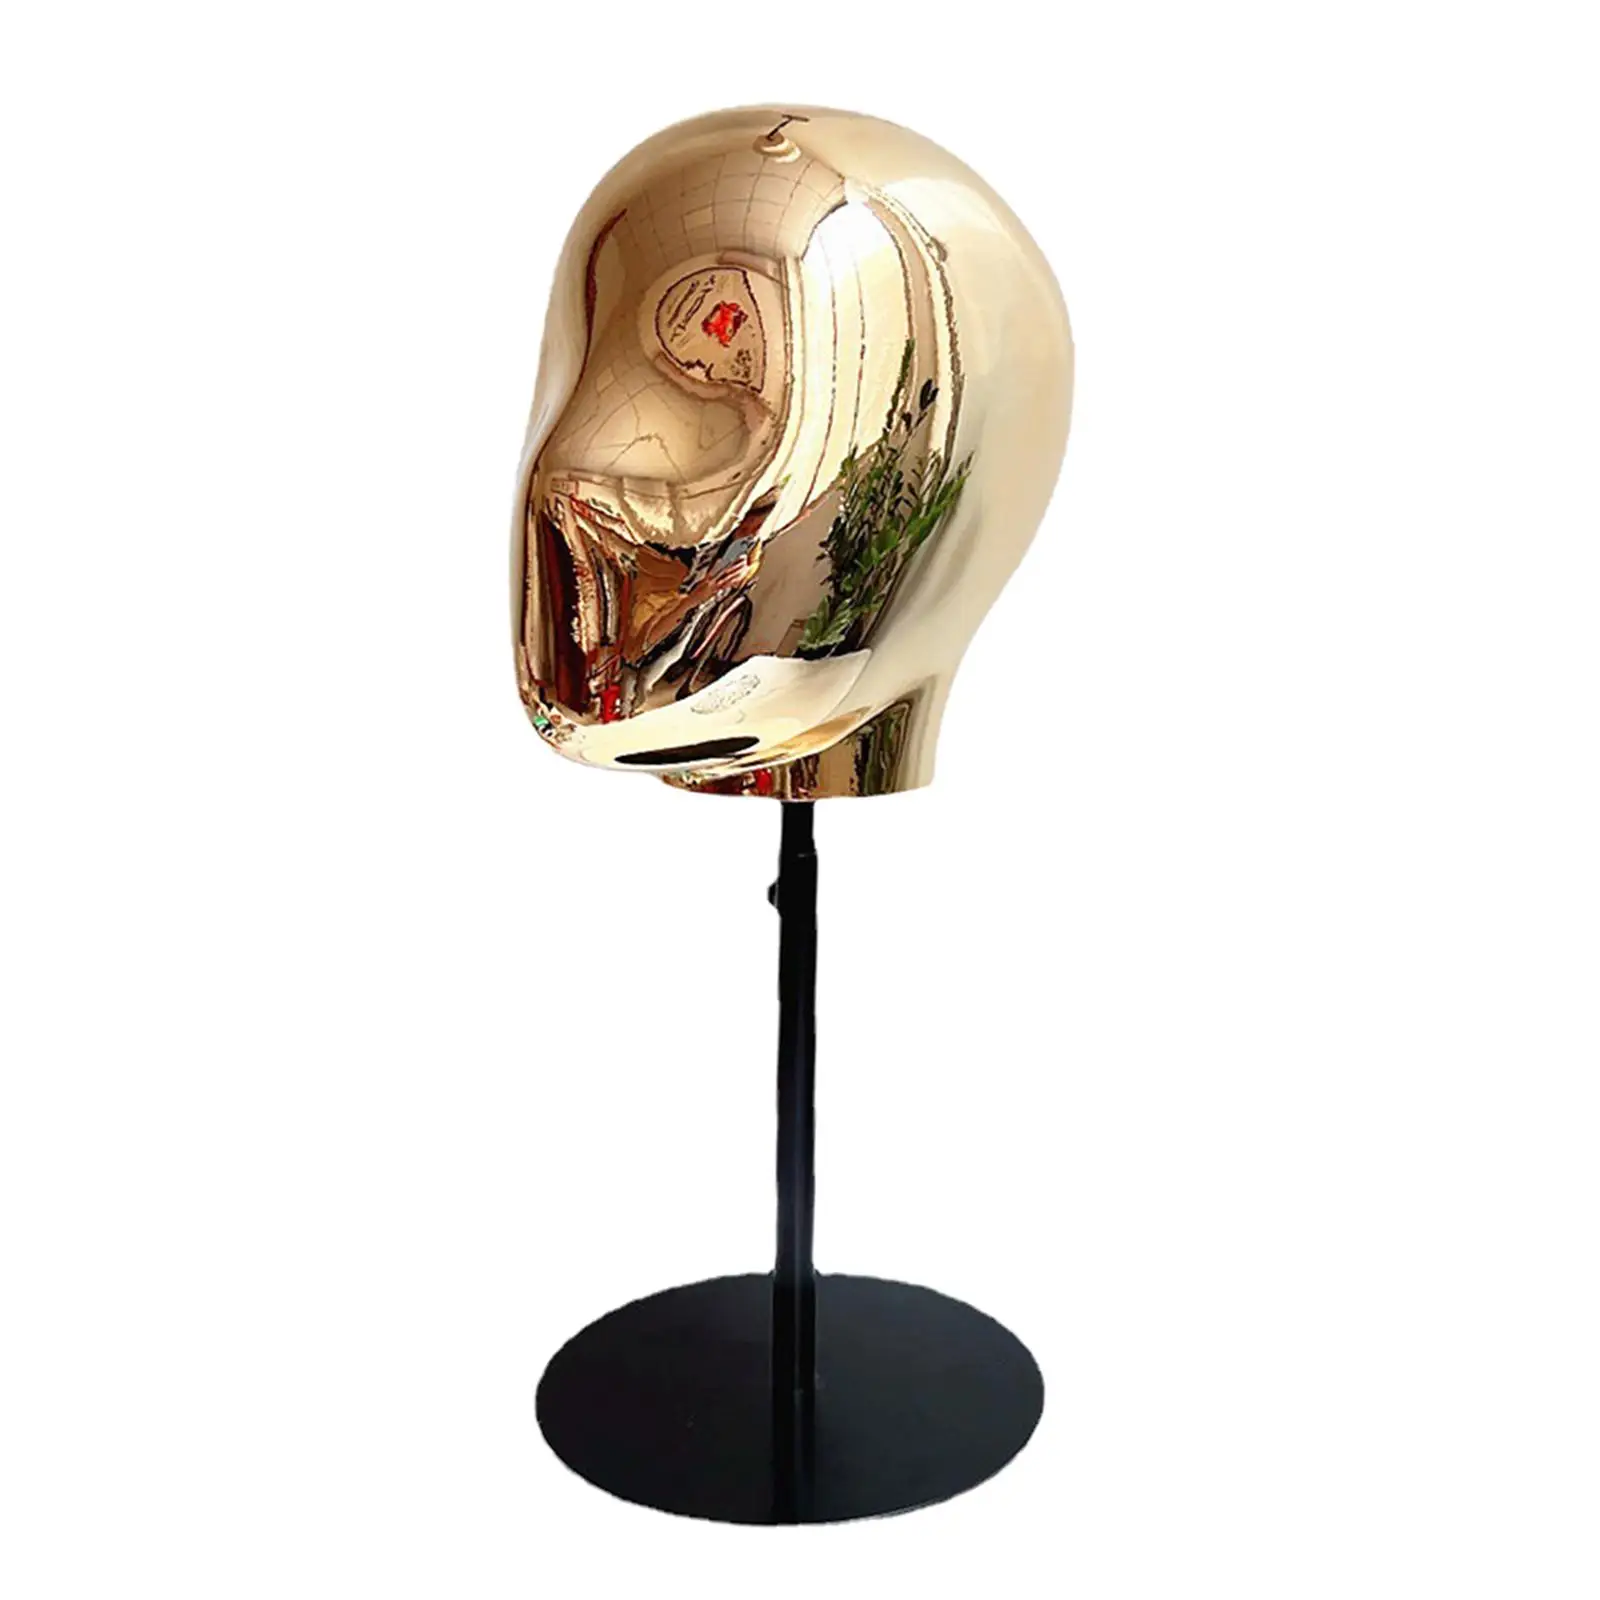 Mannequin Styling Head Wig Making Caps Display Stand for Glasses Hat Hairpieces Total 15.7-20.8inch Tall